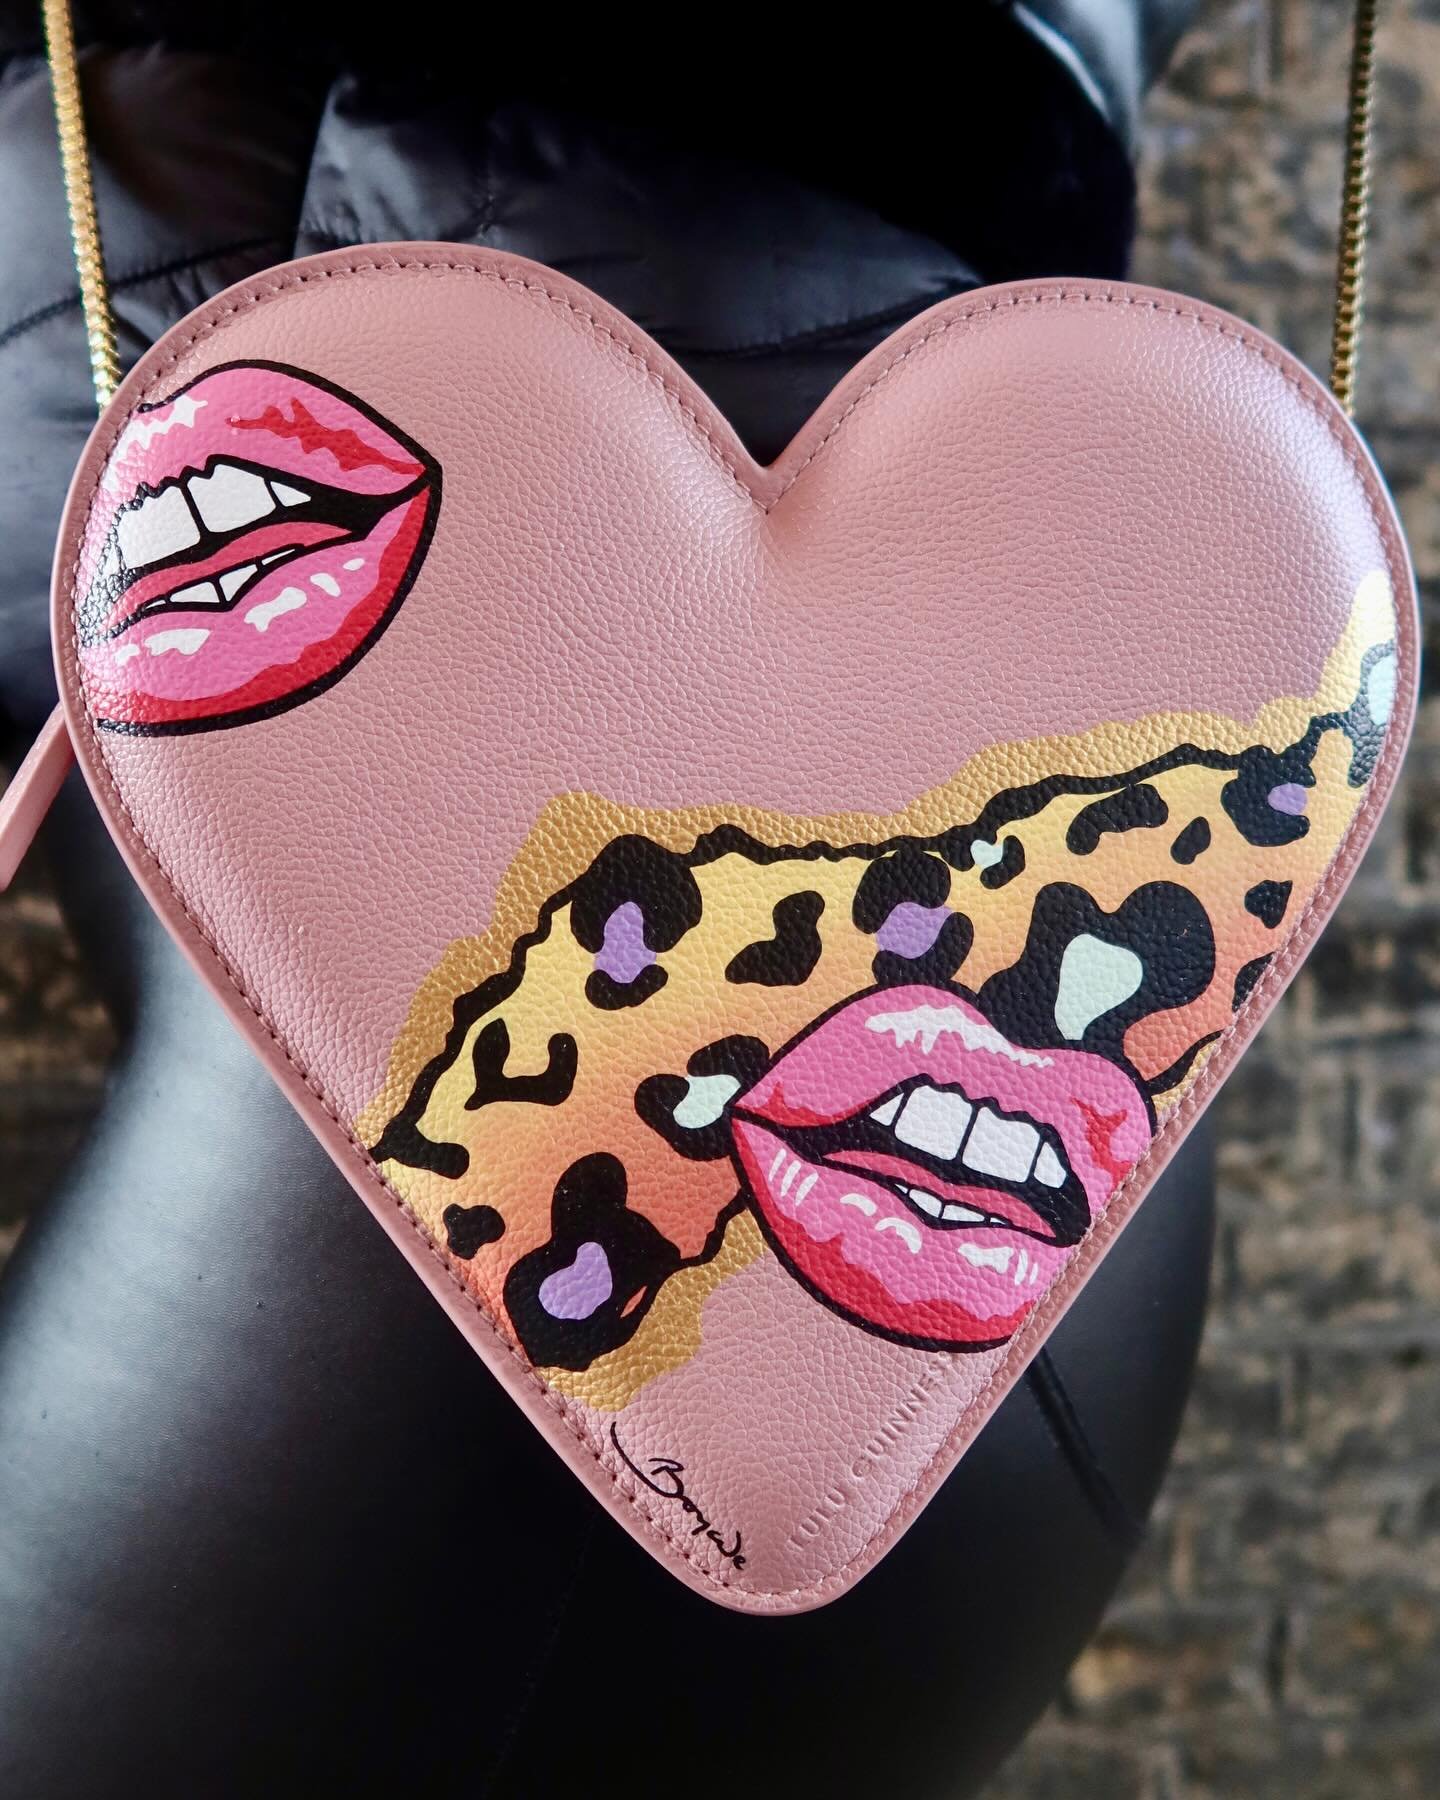 AVAILABLE FOR SALE - DM for Info &amp; Price
One of the latest creations by Boyarde🎨🖌️
The iconic @lulu_guinness heart bag reimagined with a pop art touch!

#popart #colorfulbag #uniquebag #custombag #customized #customfashion #luxurybags #handbagc